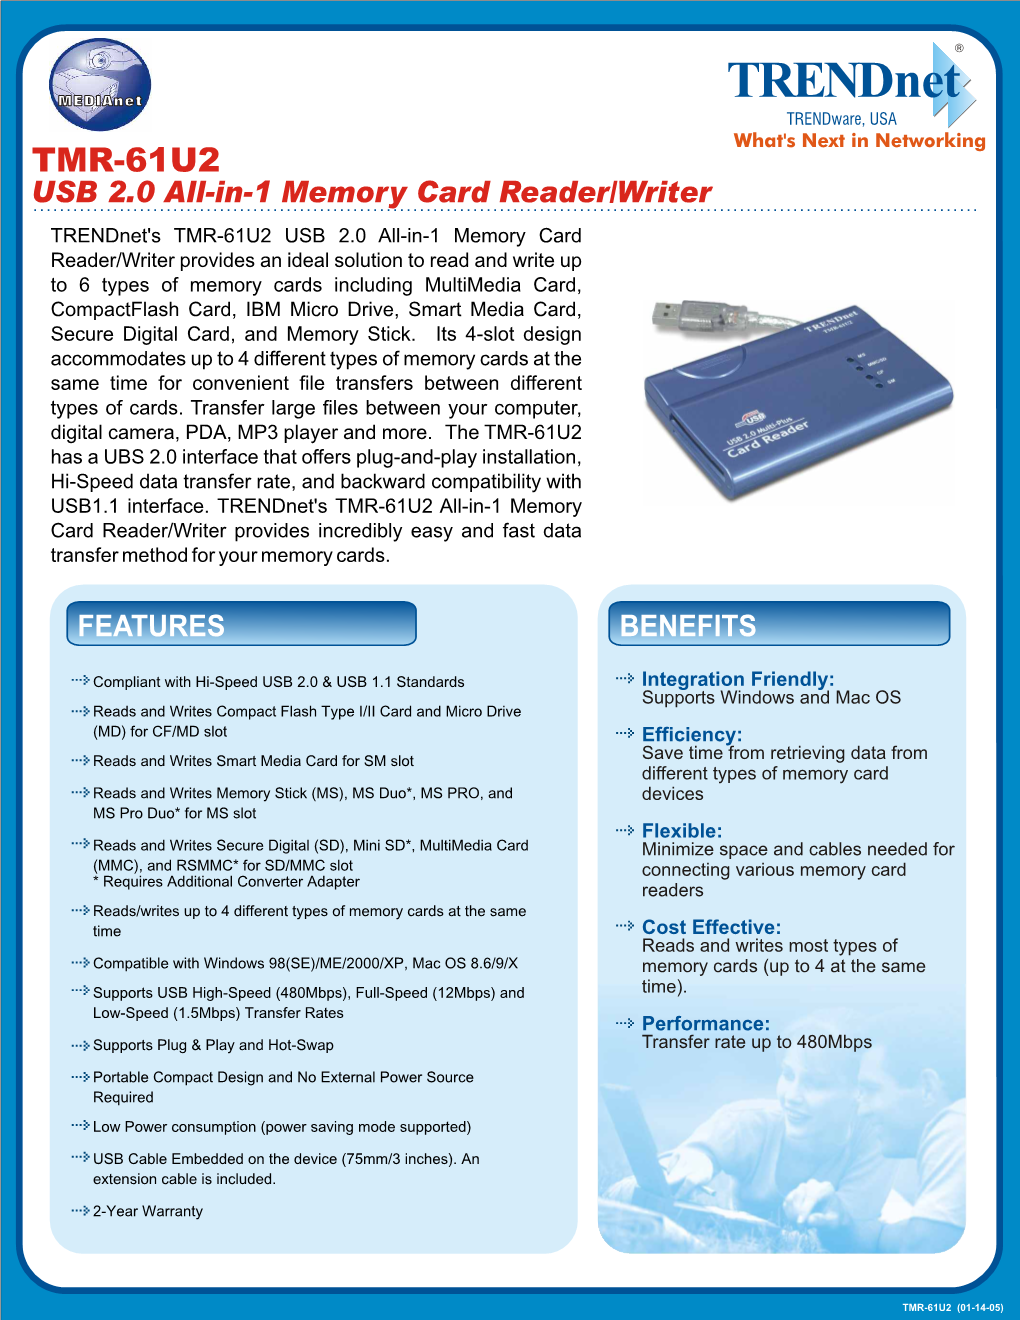 USB 2.0 All-In-1 Memory Card Reader/Writer BENEFITS